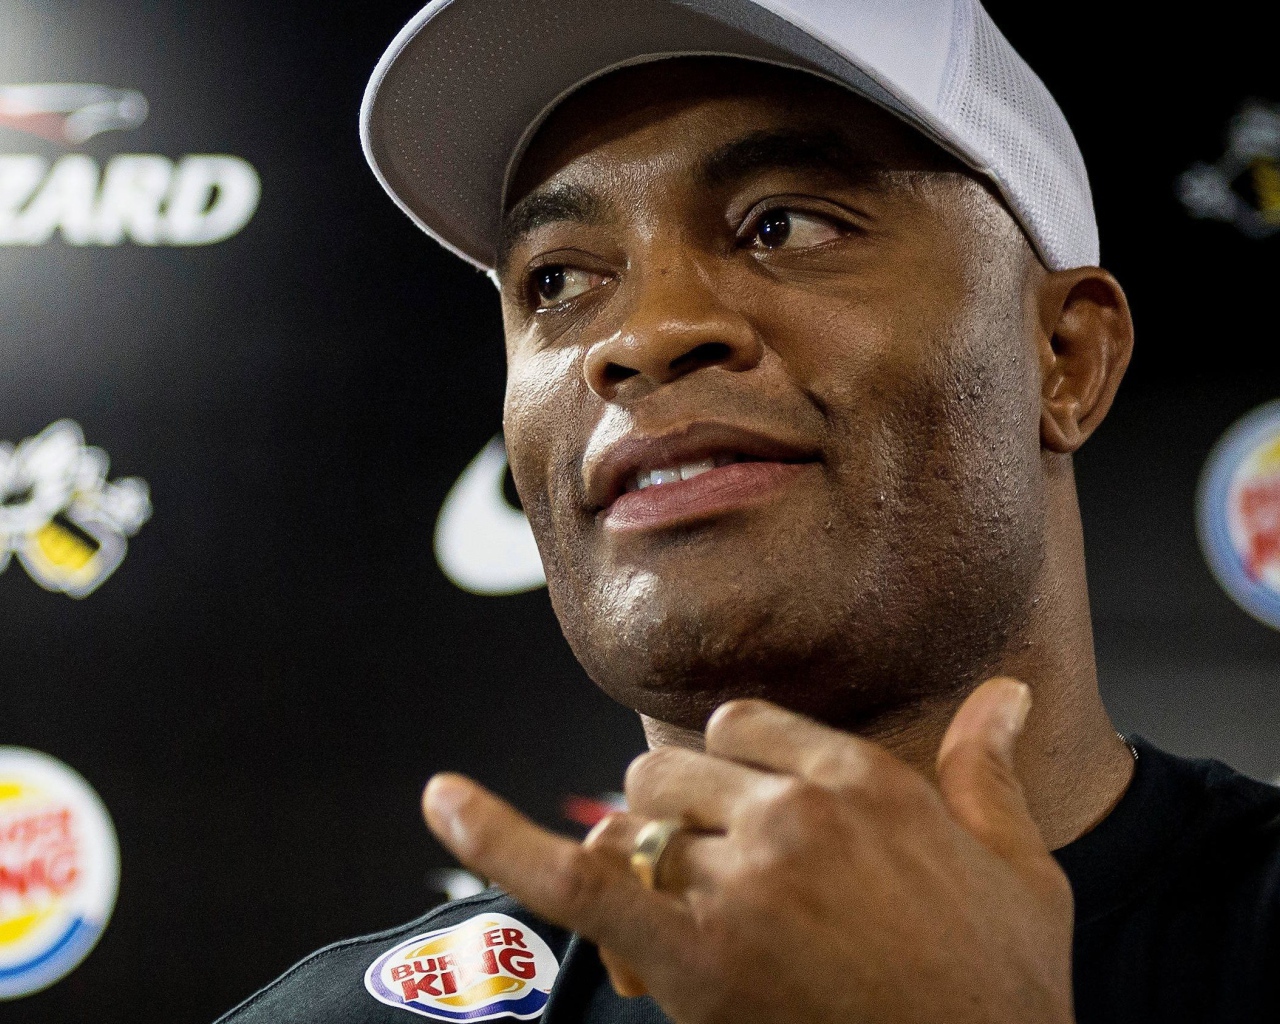 Famous fighter Anderson Silva. spider 